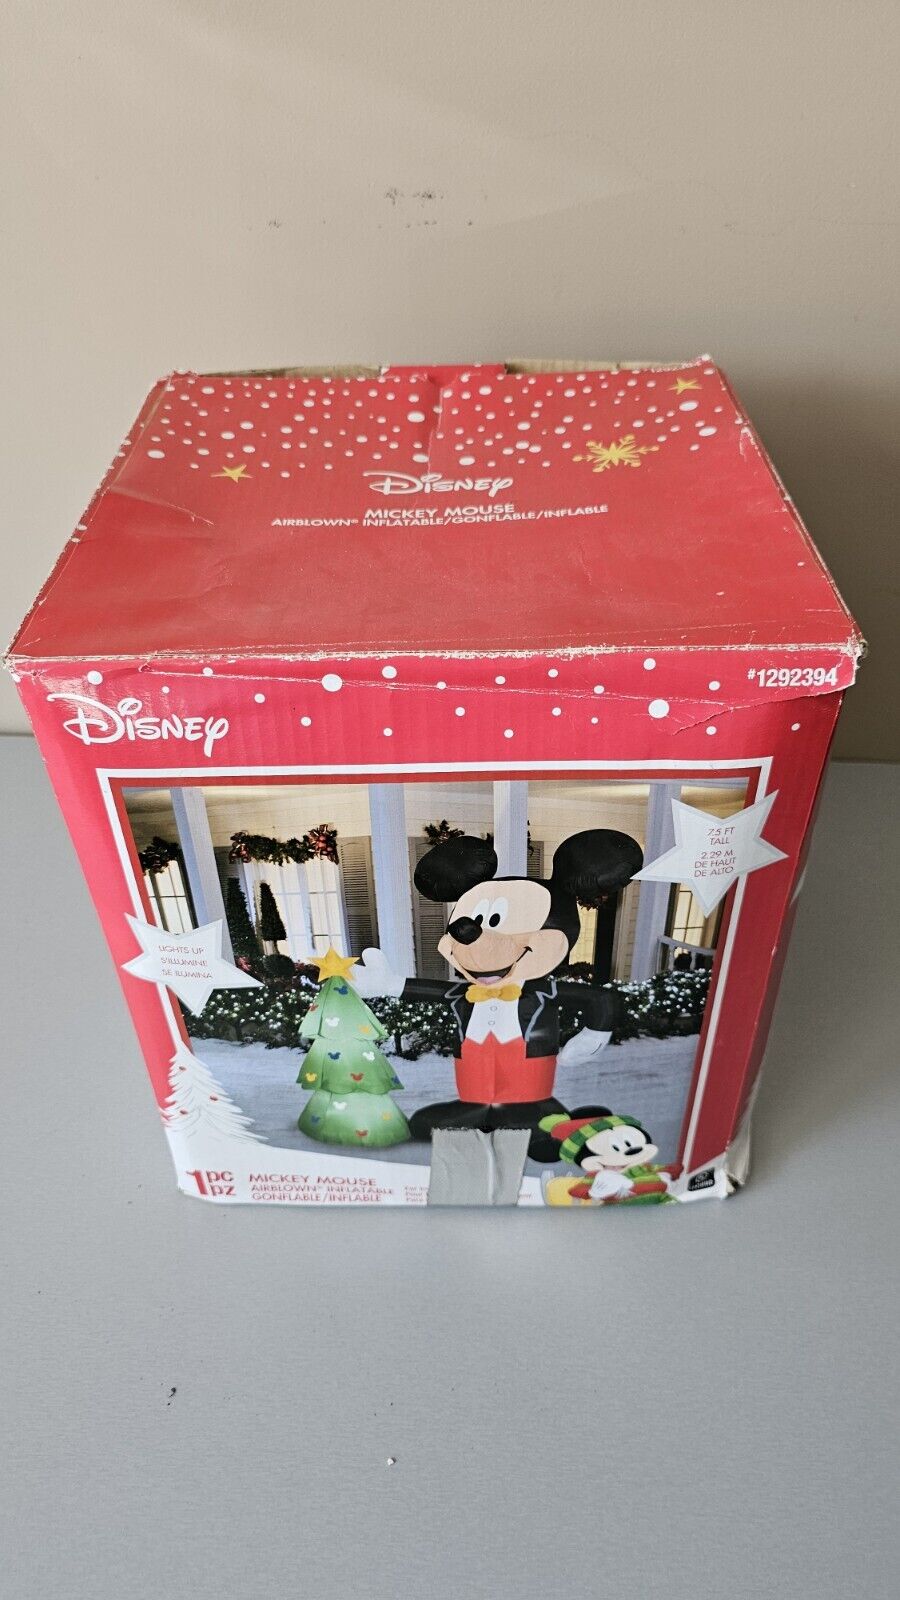 DISNEY Mickey Mouse 7.5ft Christmas Airblown Inflatable Tree #1292394 2019